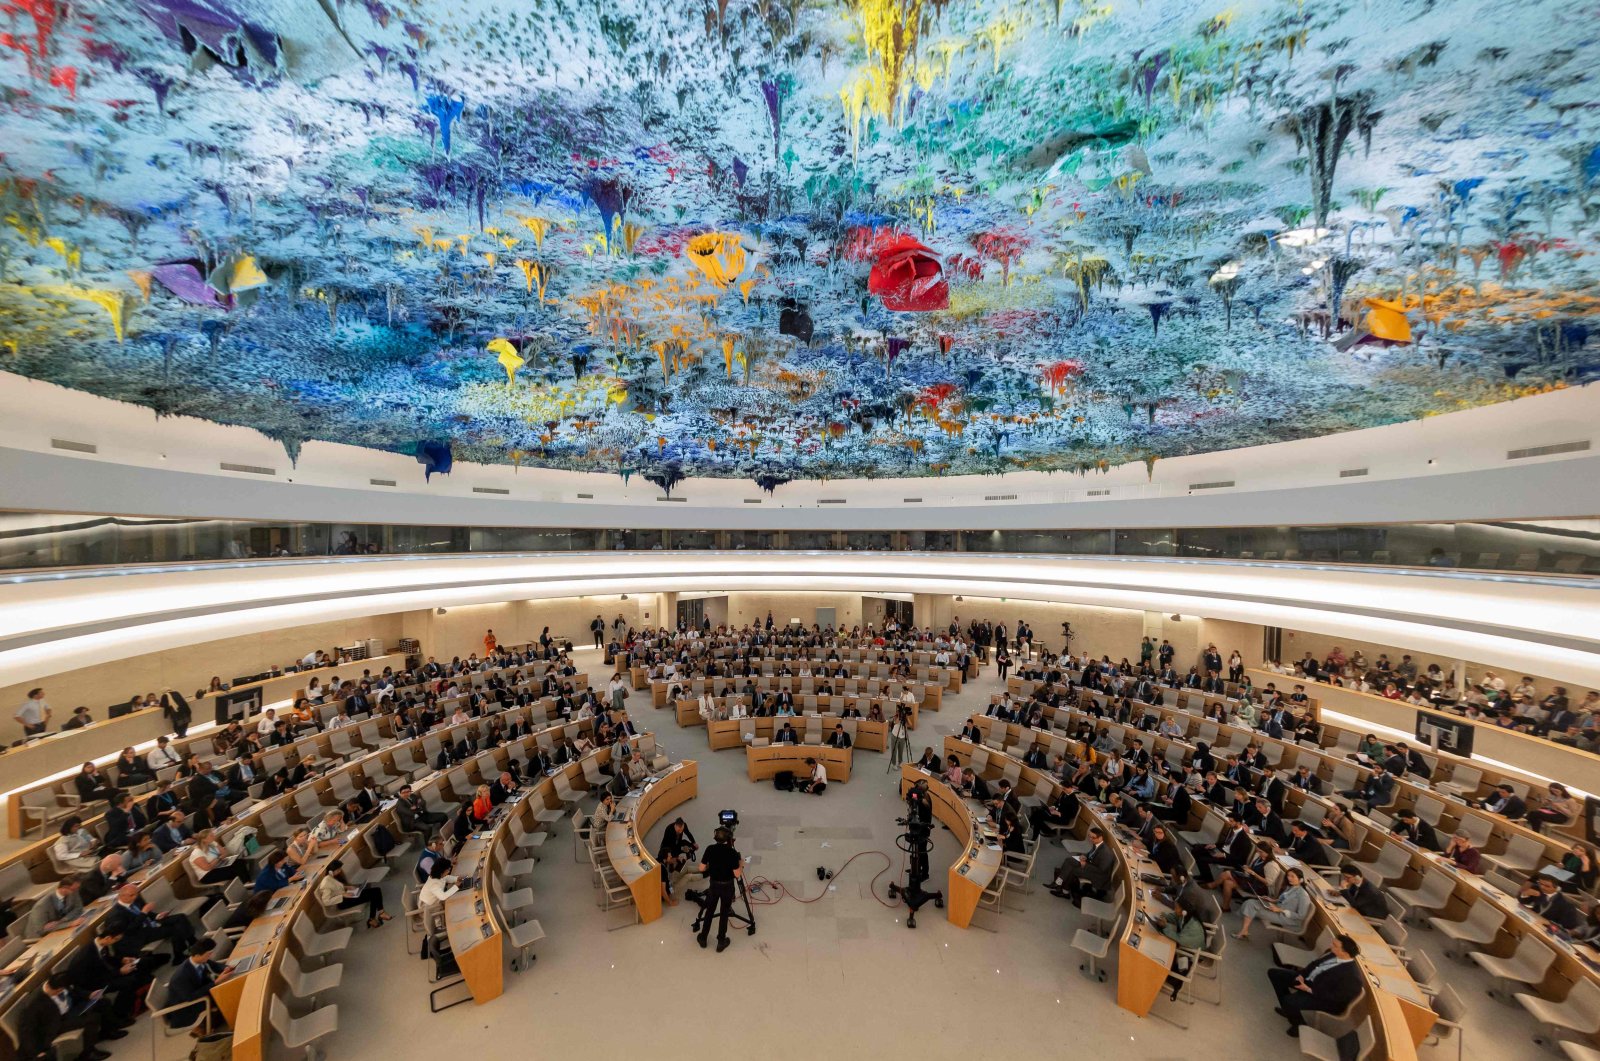 A general view of the Human Rights and Alliance of Civilizations Room, with the ceiling painted by Spanish painter Miquel Barcelo, at the opening of the 53rd U.N. Human Rights Council in Geneva, on June 19, 2023. (AFP Photo)